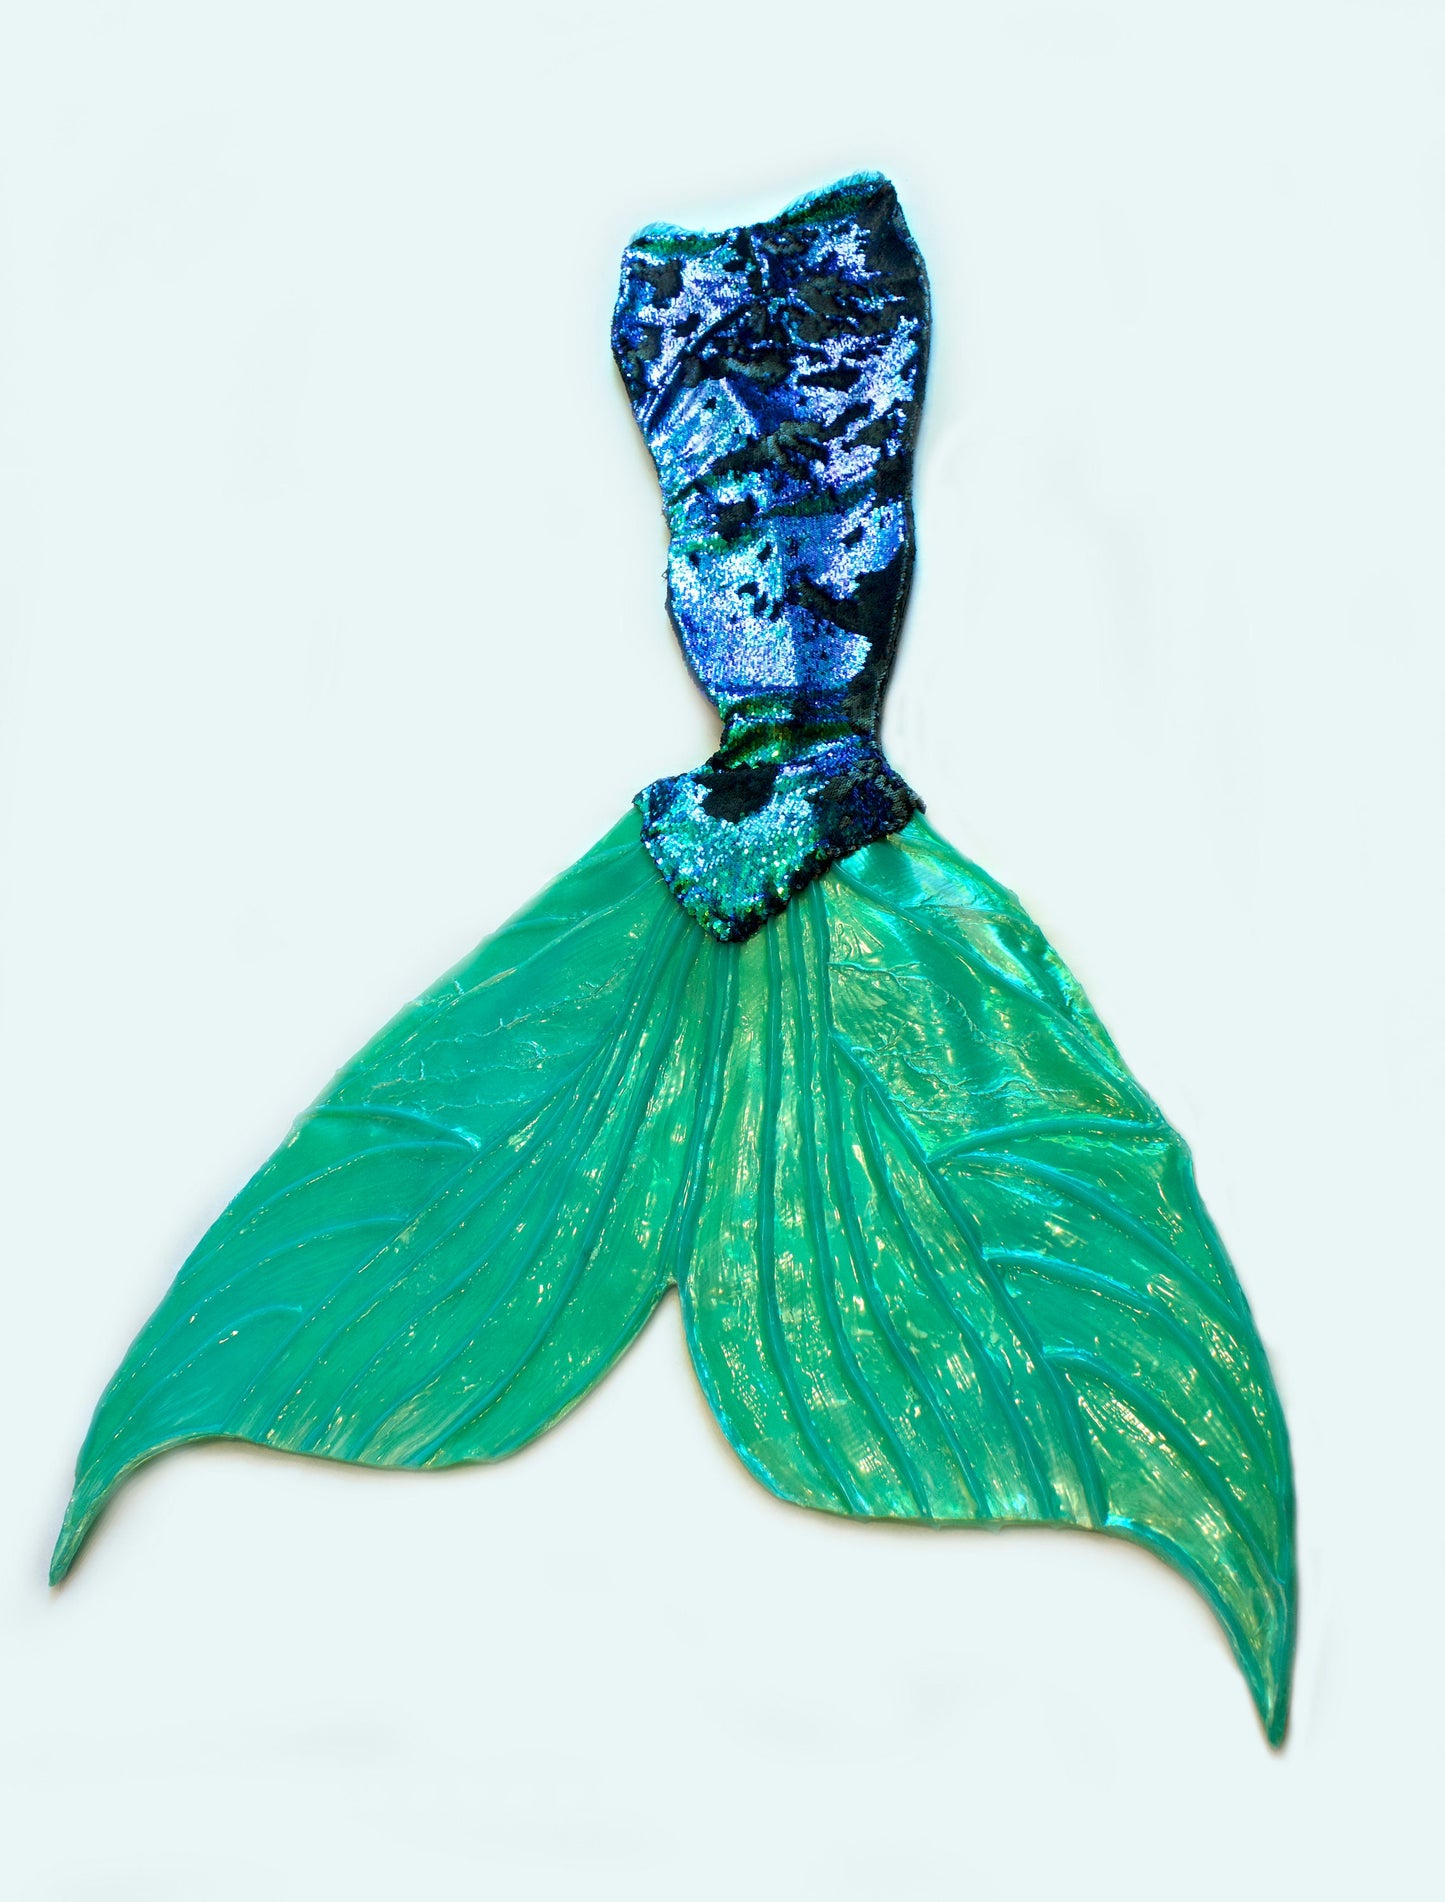 Professional and hybrid mermaid tail in sequins and silicone, caudal fin completely in silicone (dragon skin), accessible price.